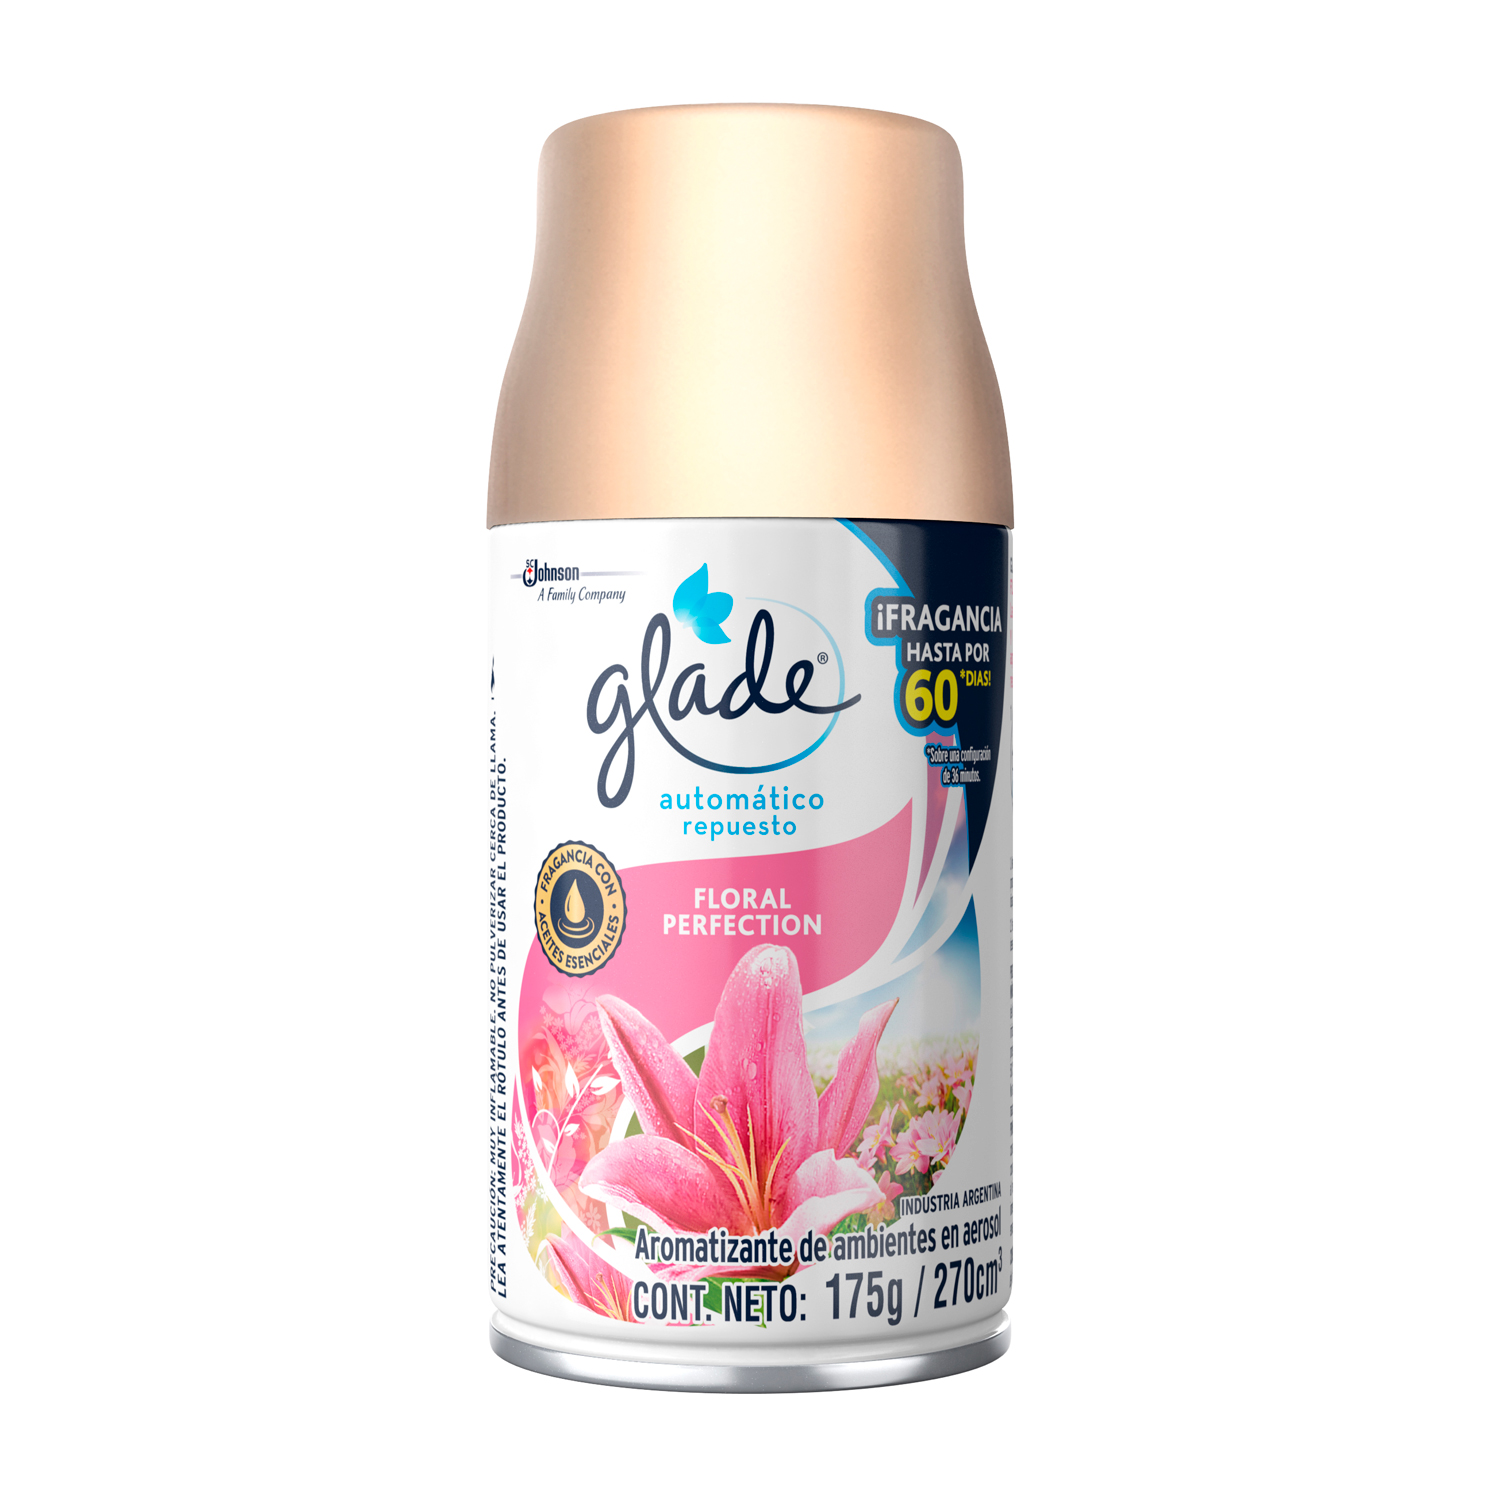 Glade® Automatico Floral Perfection